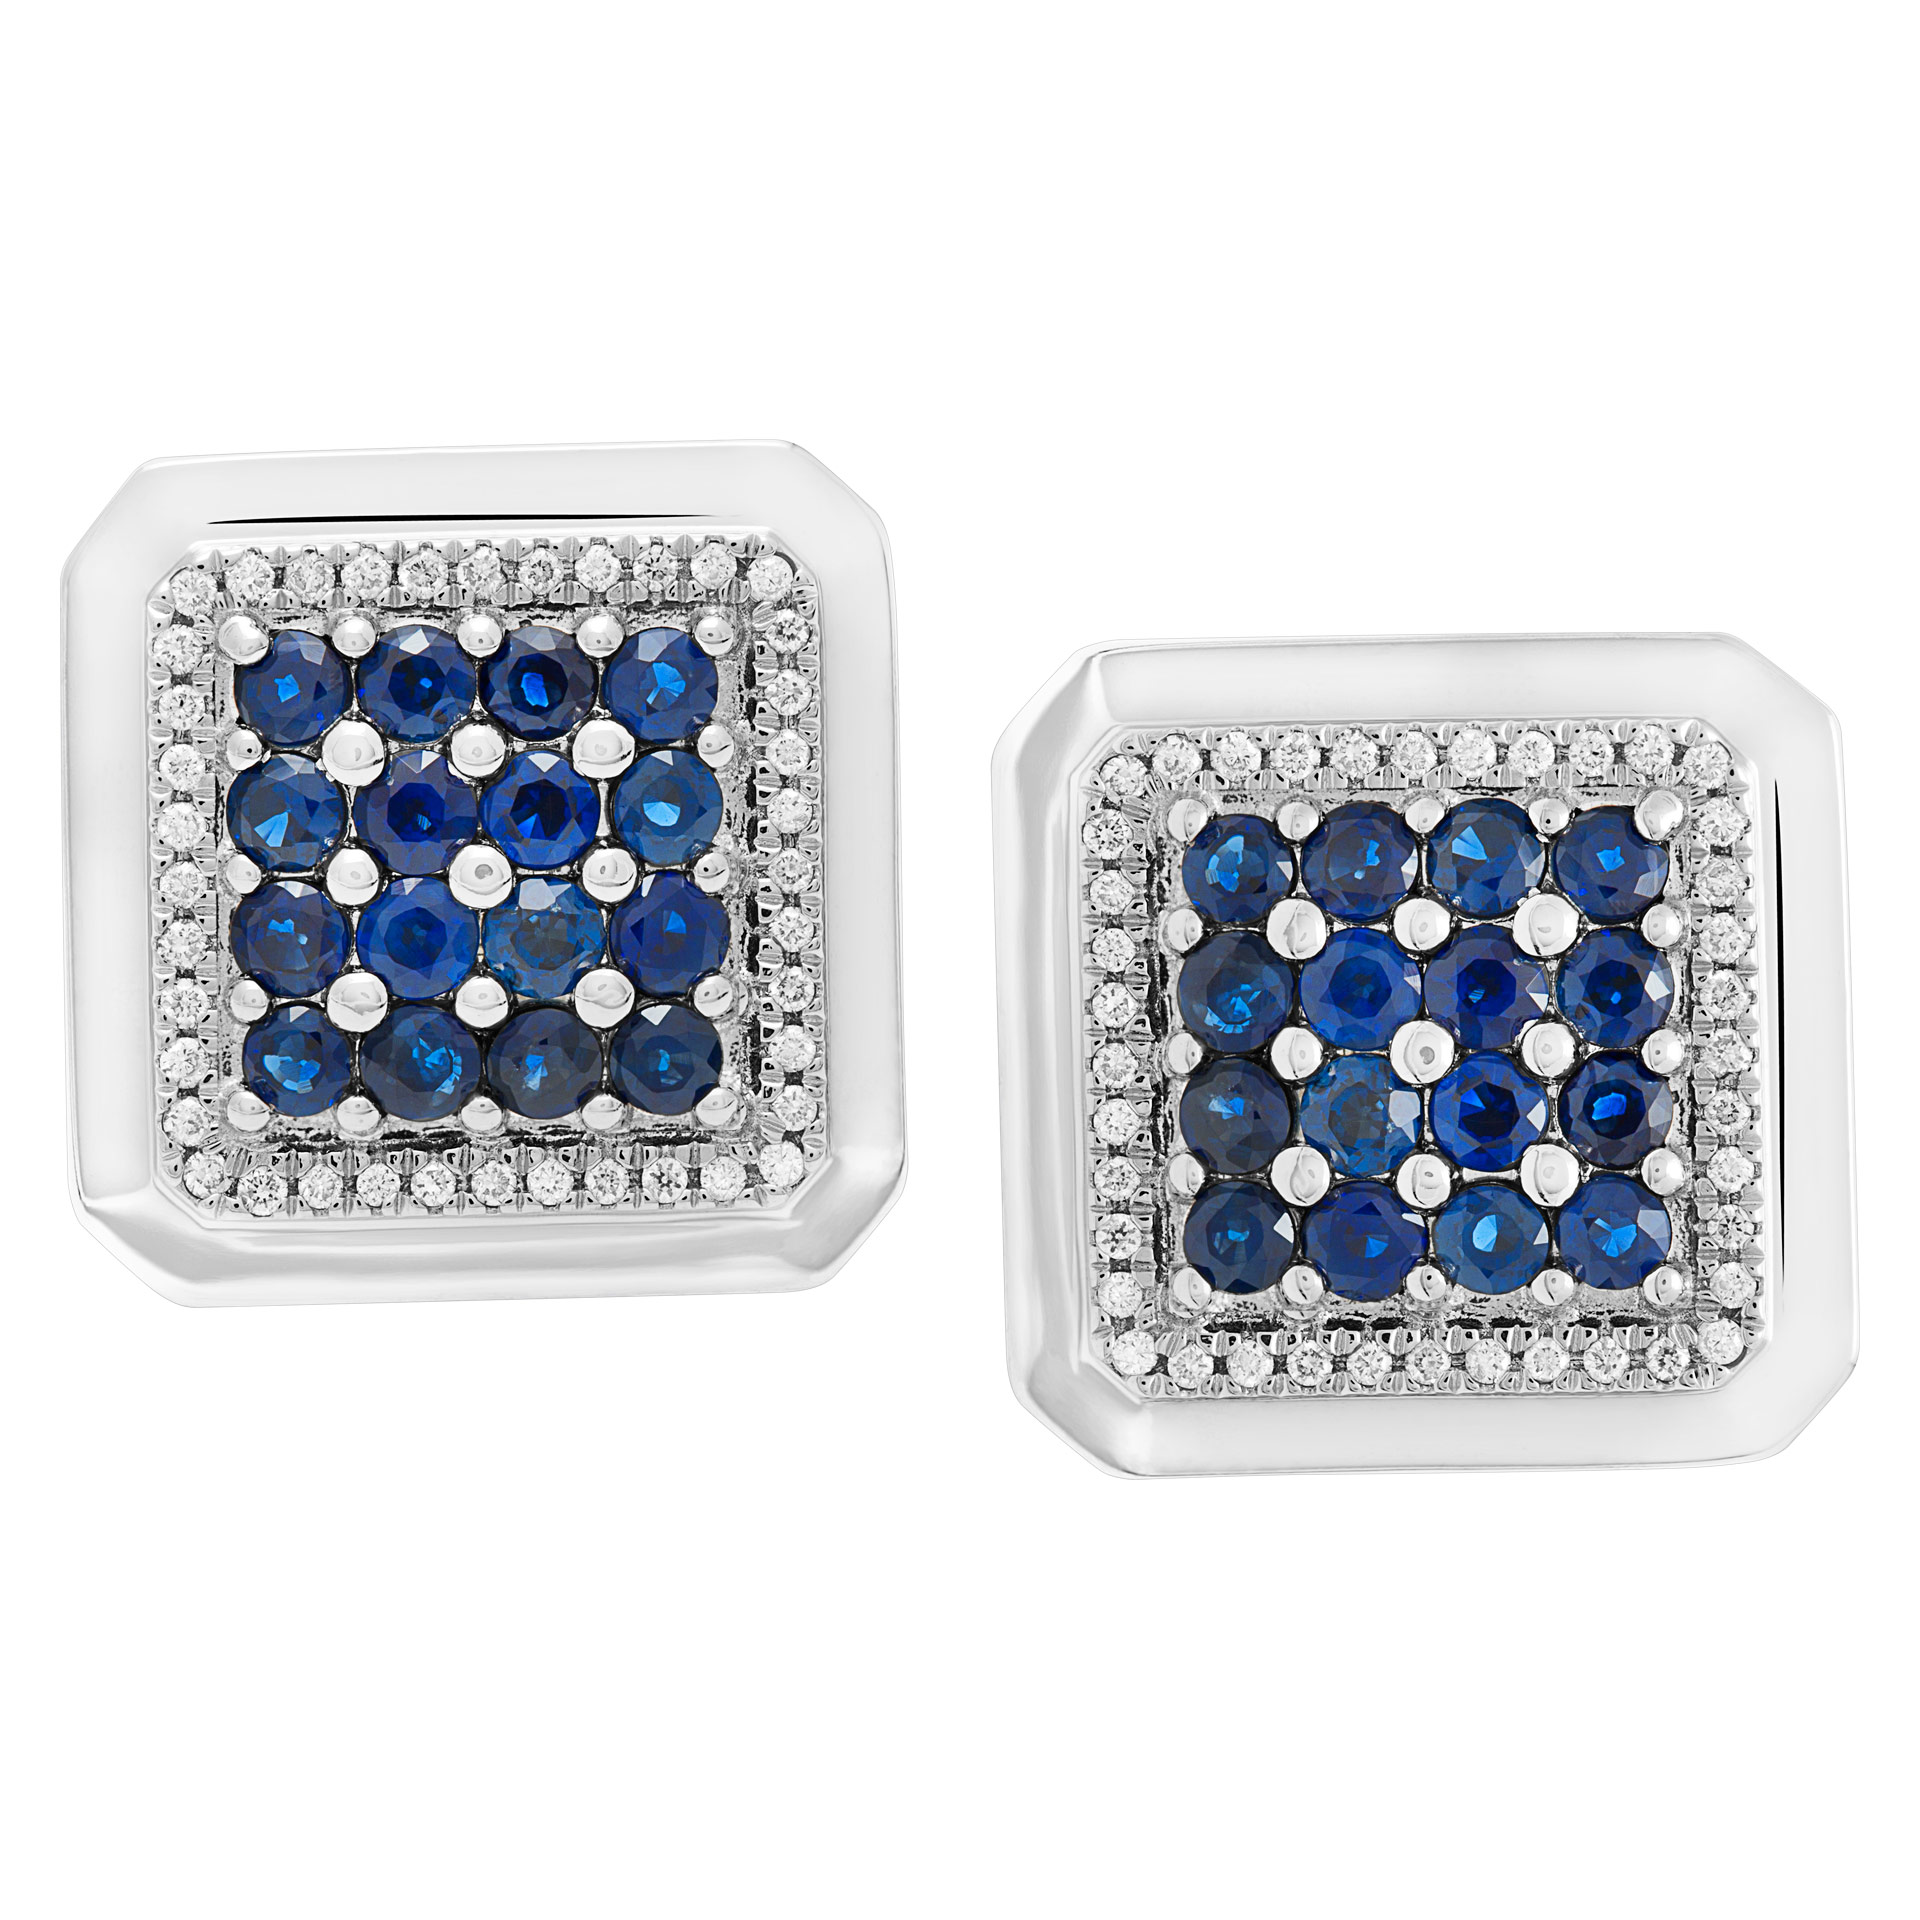 18k white gold cufflinks with diamonds and sapphire